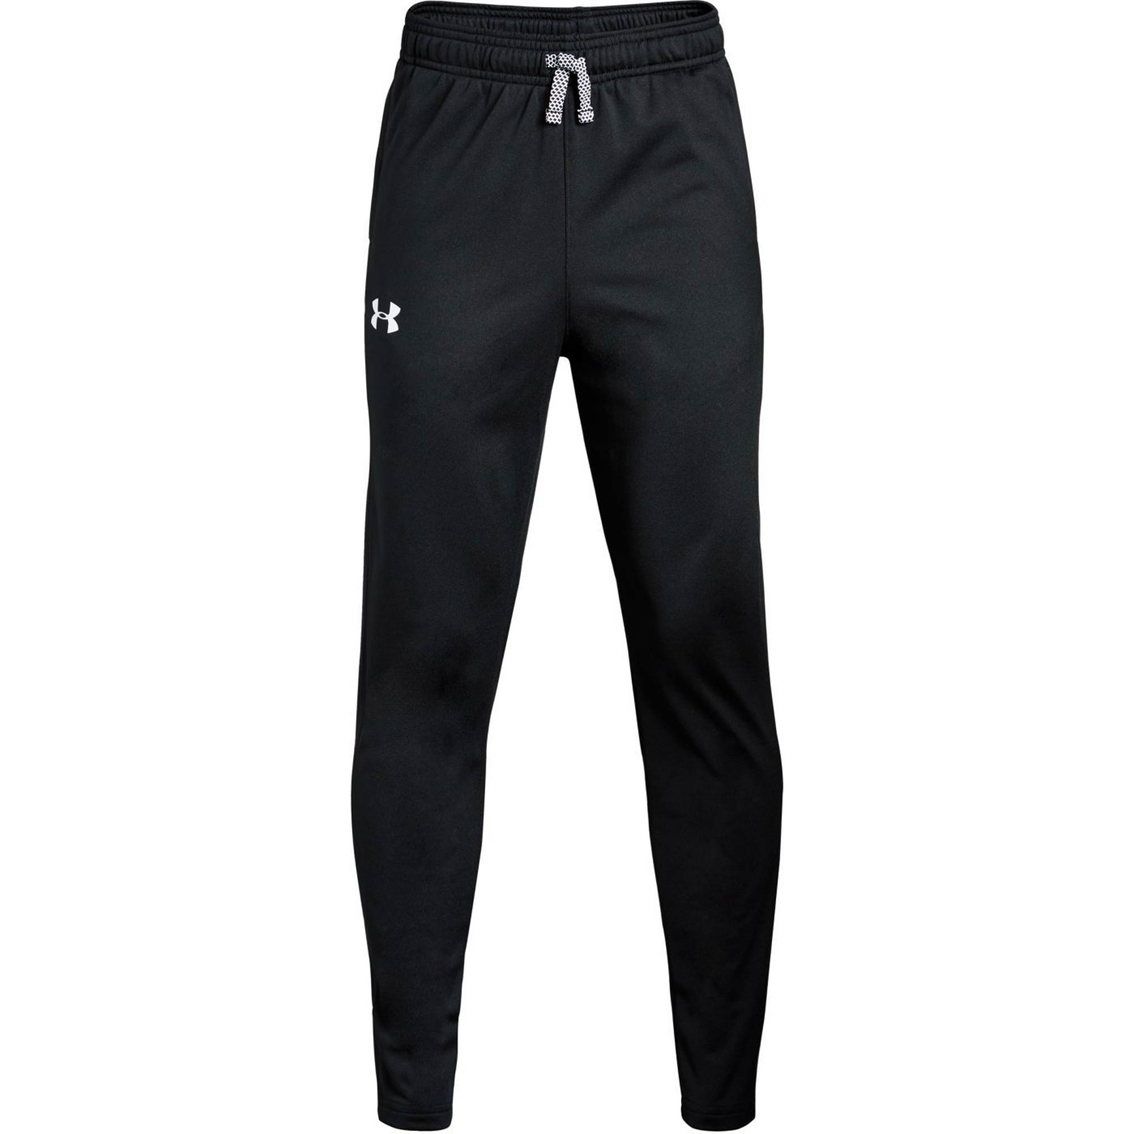 Under Armour Brawler Tapered Pants | Boys 8-20 | Clothing & Accessories ...